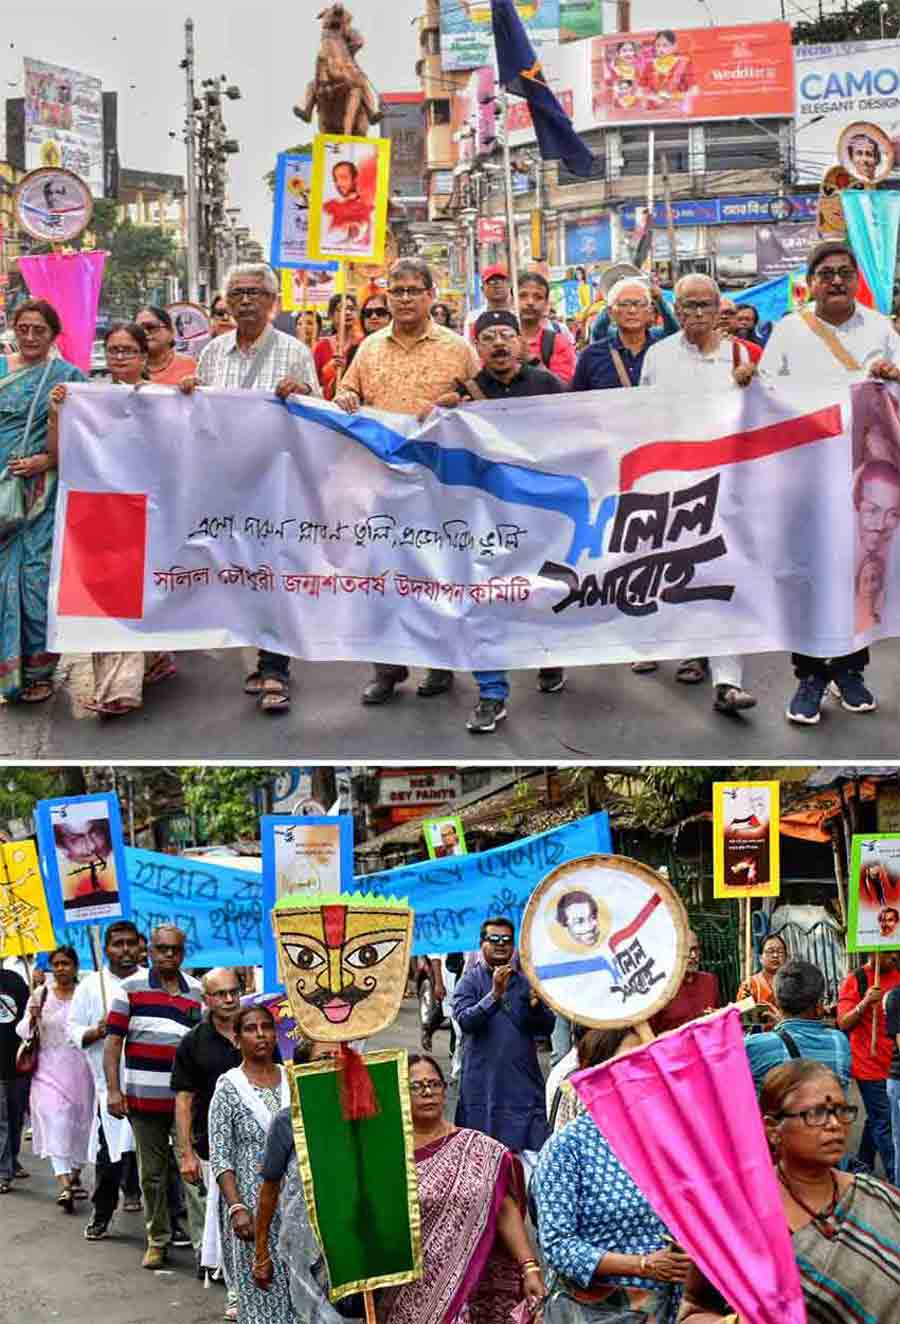 A rally to commemorate the birth anniversary of music composer and songwriter Salil Chowdhury in north Kolkata on Monday  